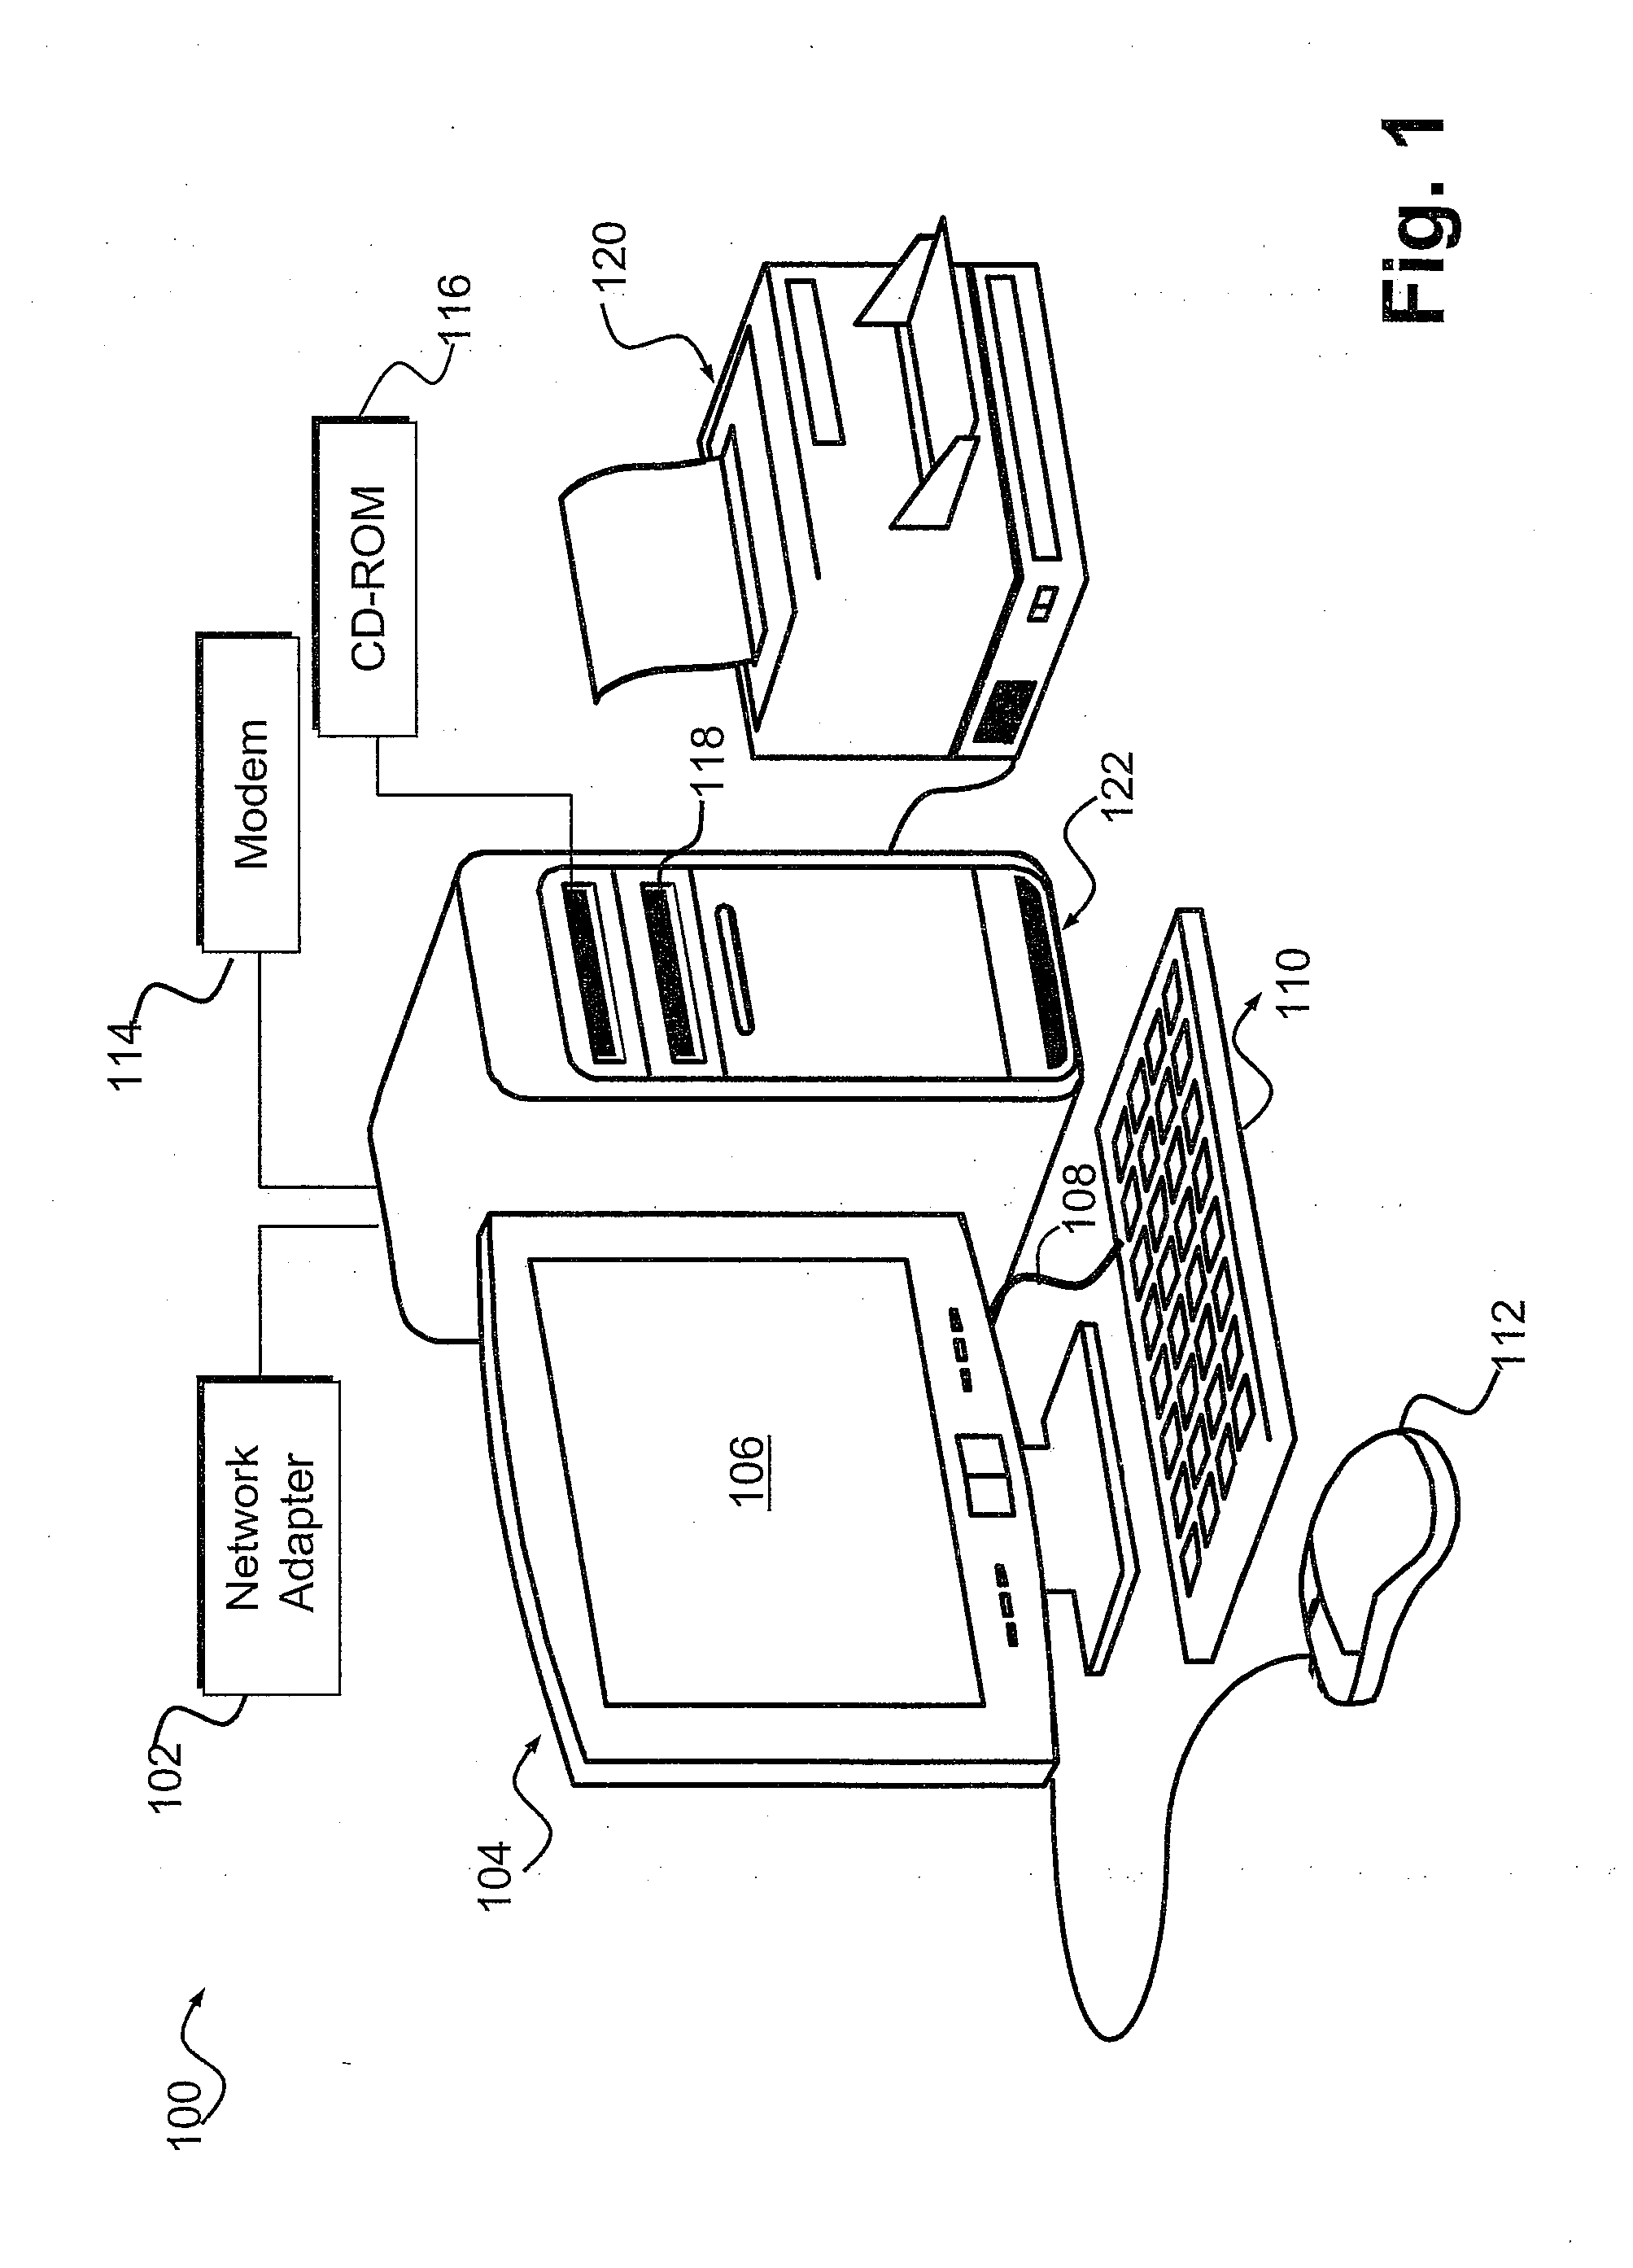 Method for determining and outputting travel instructions for most fuel-efficient route